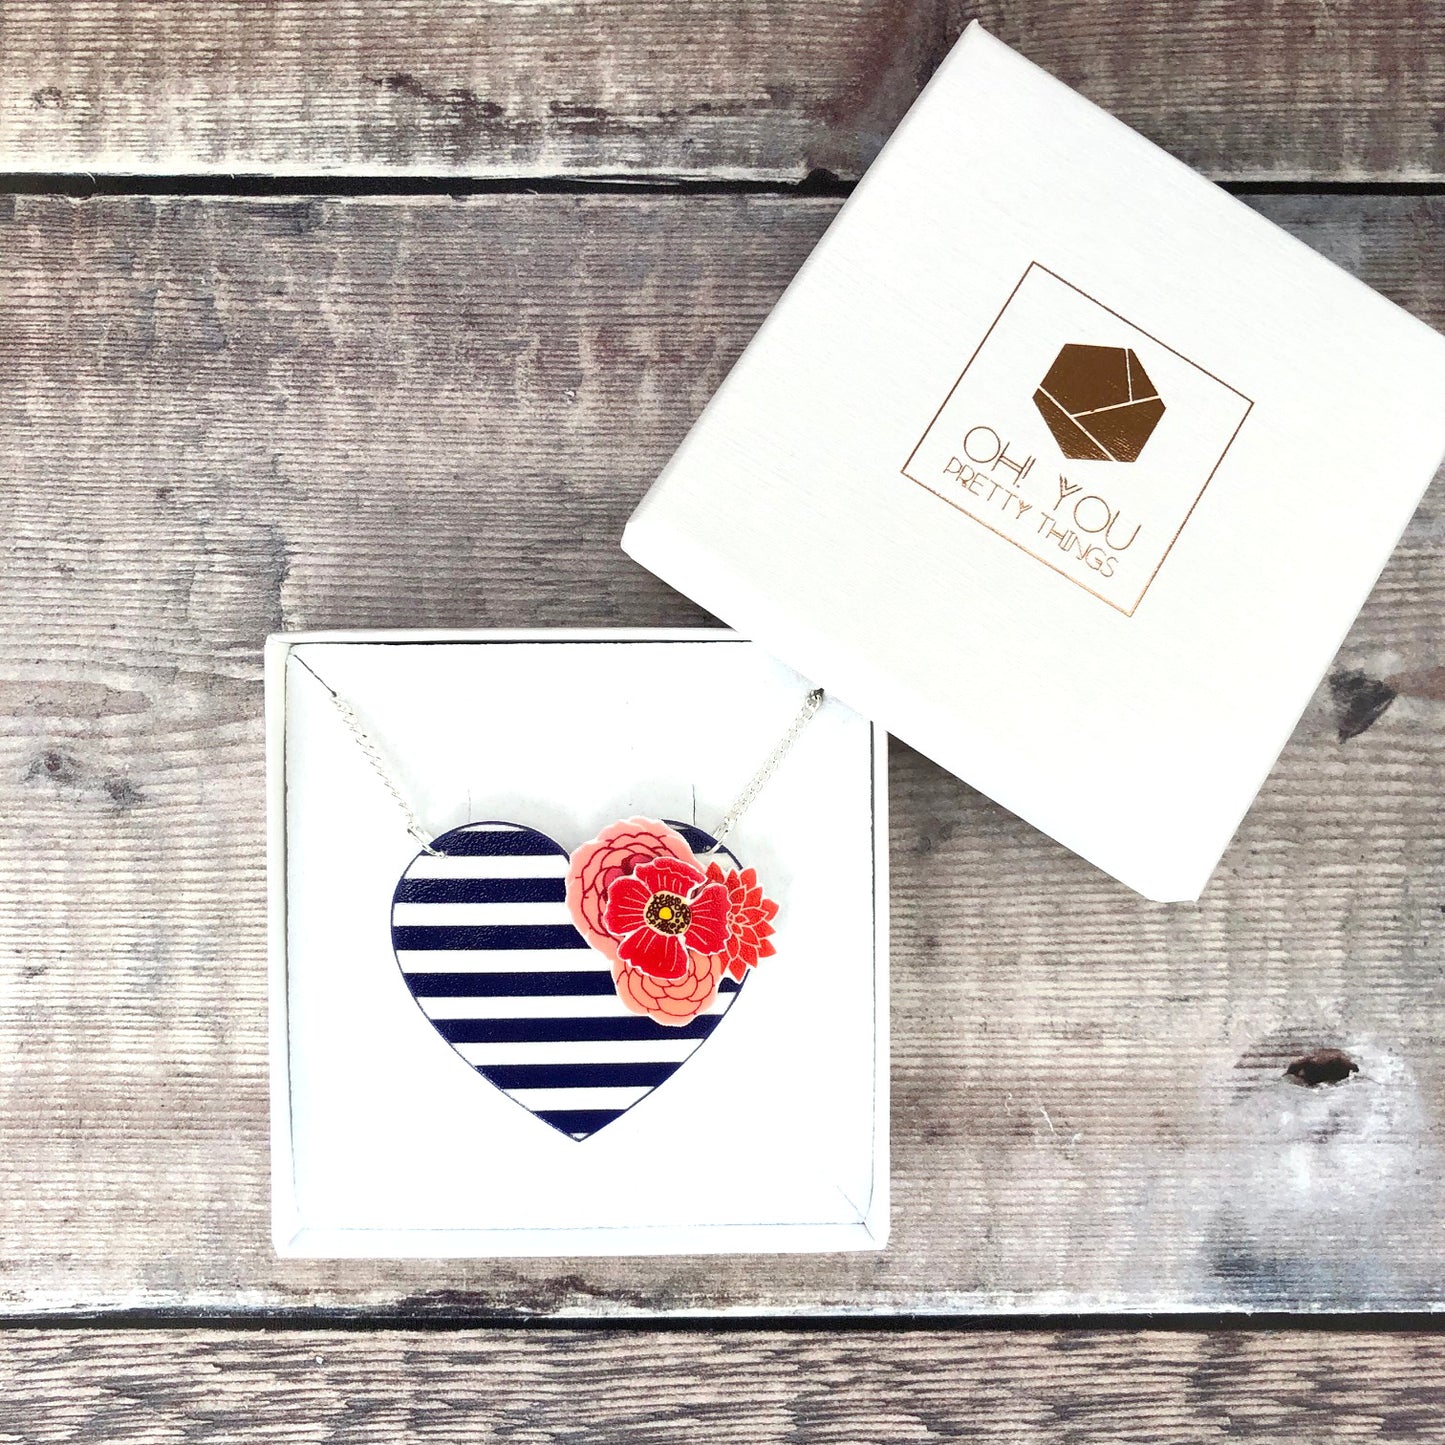 Navy nautical heart necklace - Stripes and flowers - Valentine gift for her